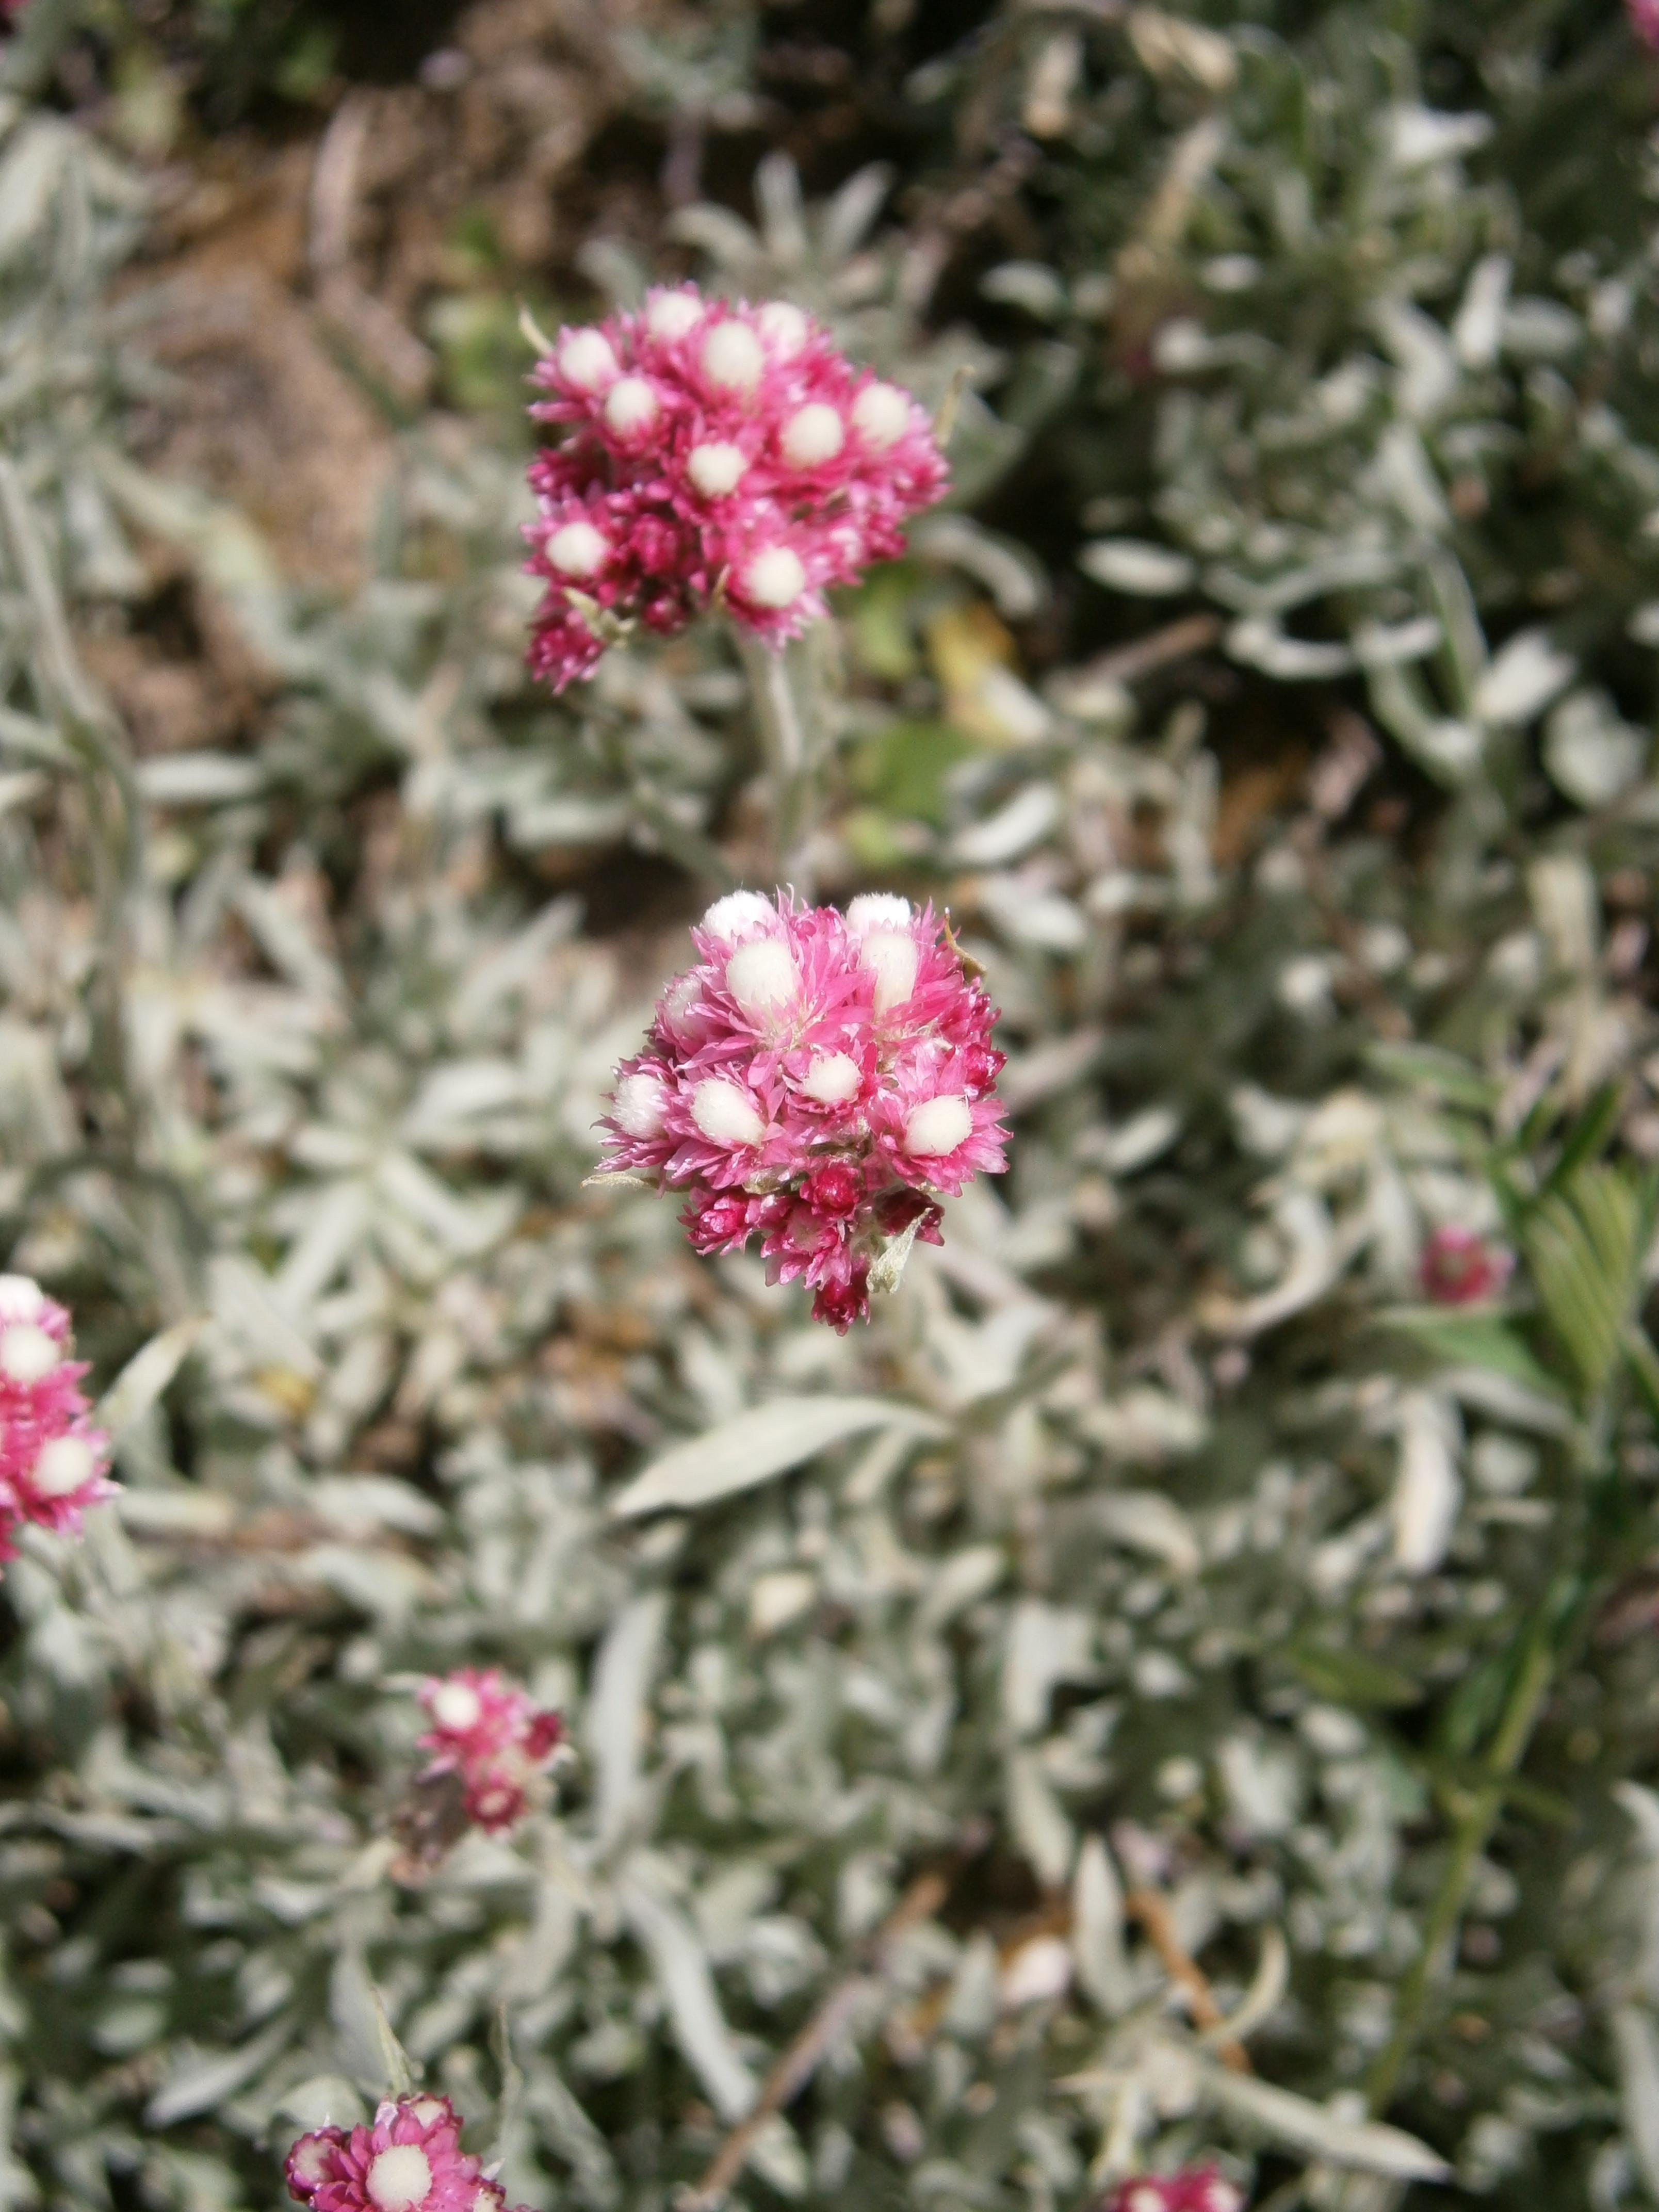 pink-white flowers with light-green leaves and stems